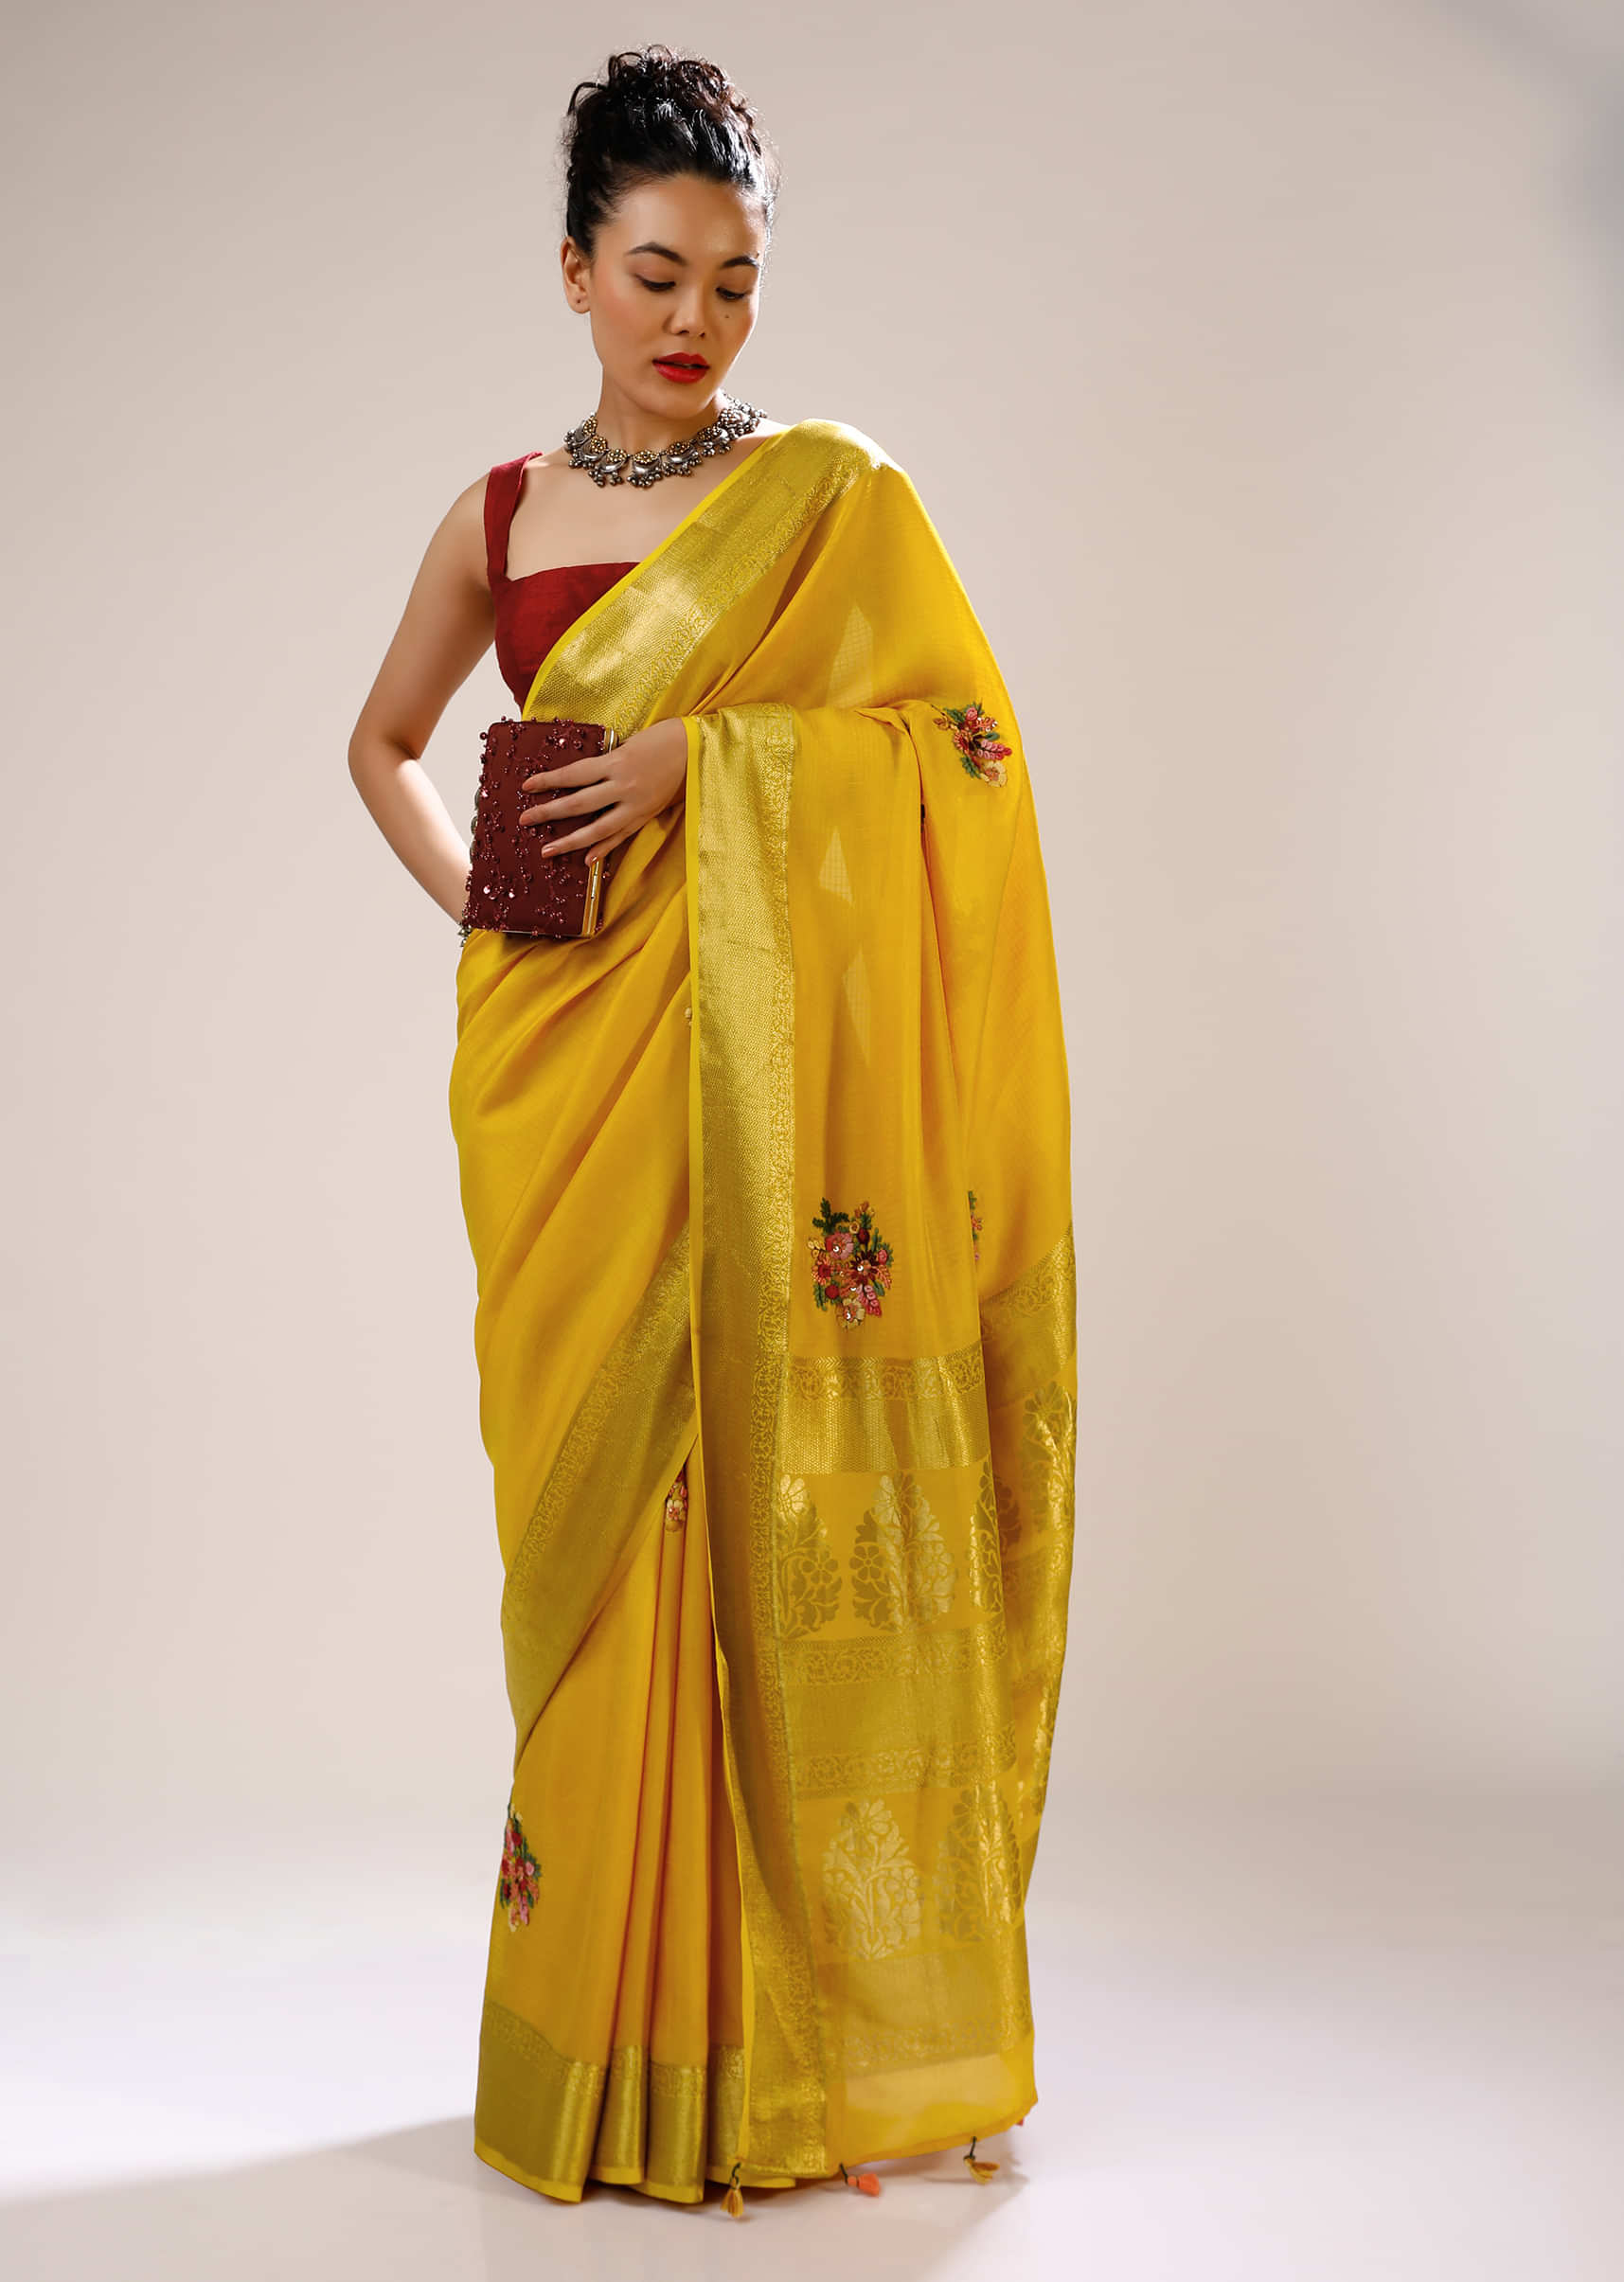 Golden Glow Saree In Silk Blend With Checks Weave, Multi Colored Bud Embroidered Floral Motifs And Brocade Border  